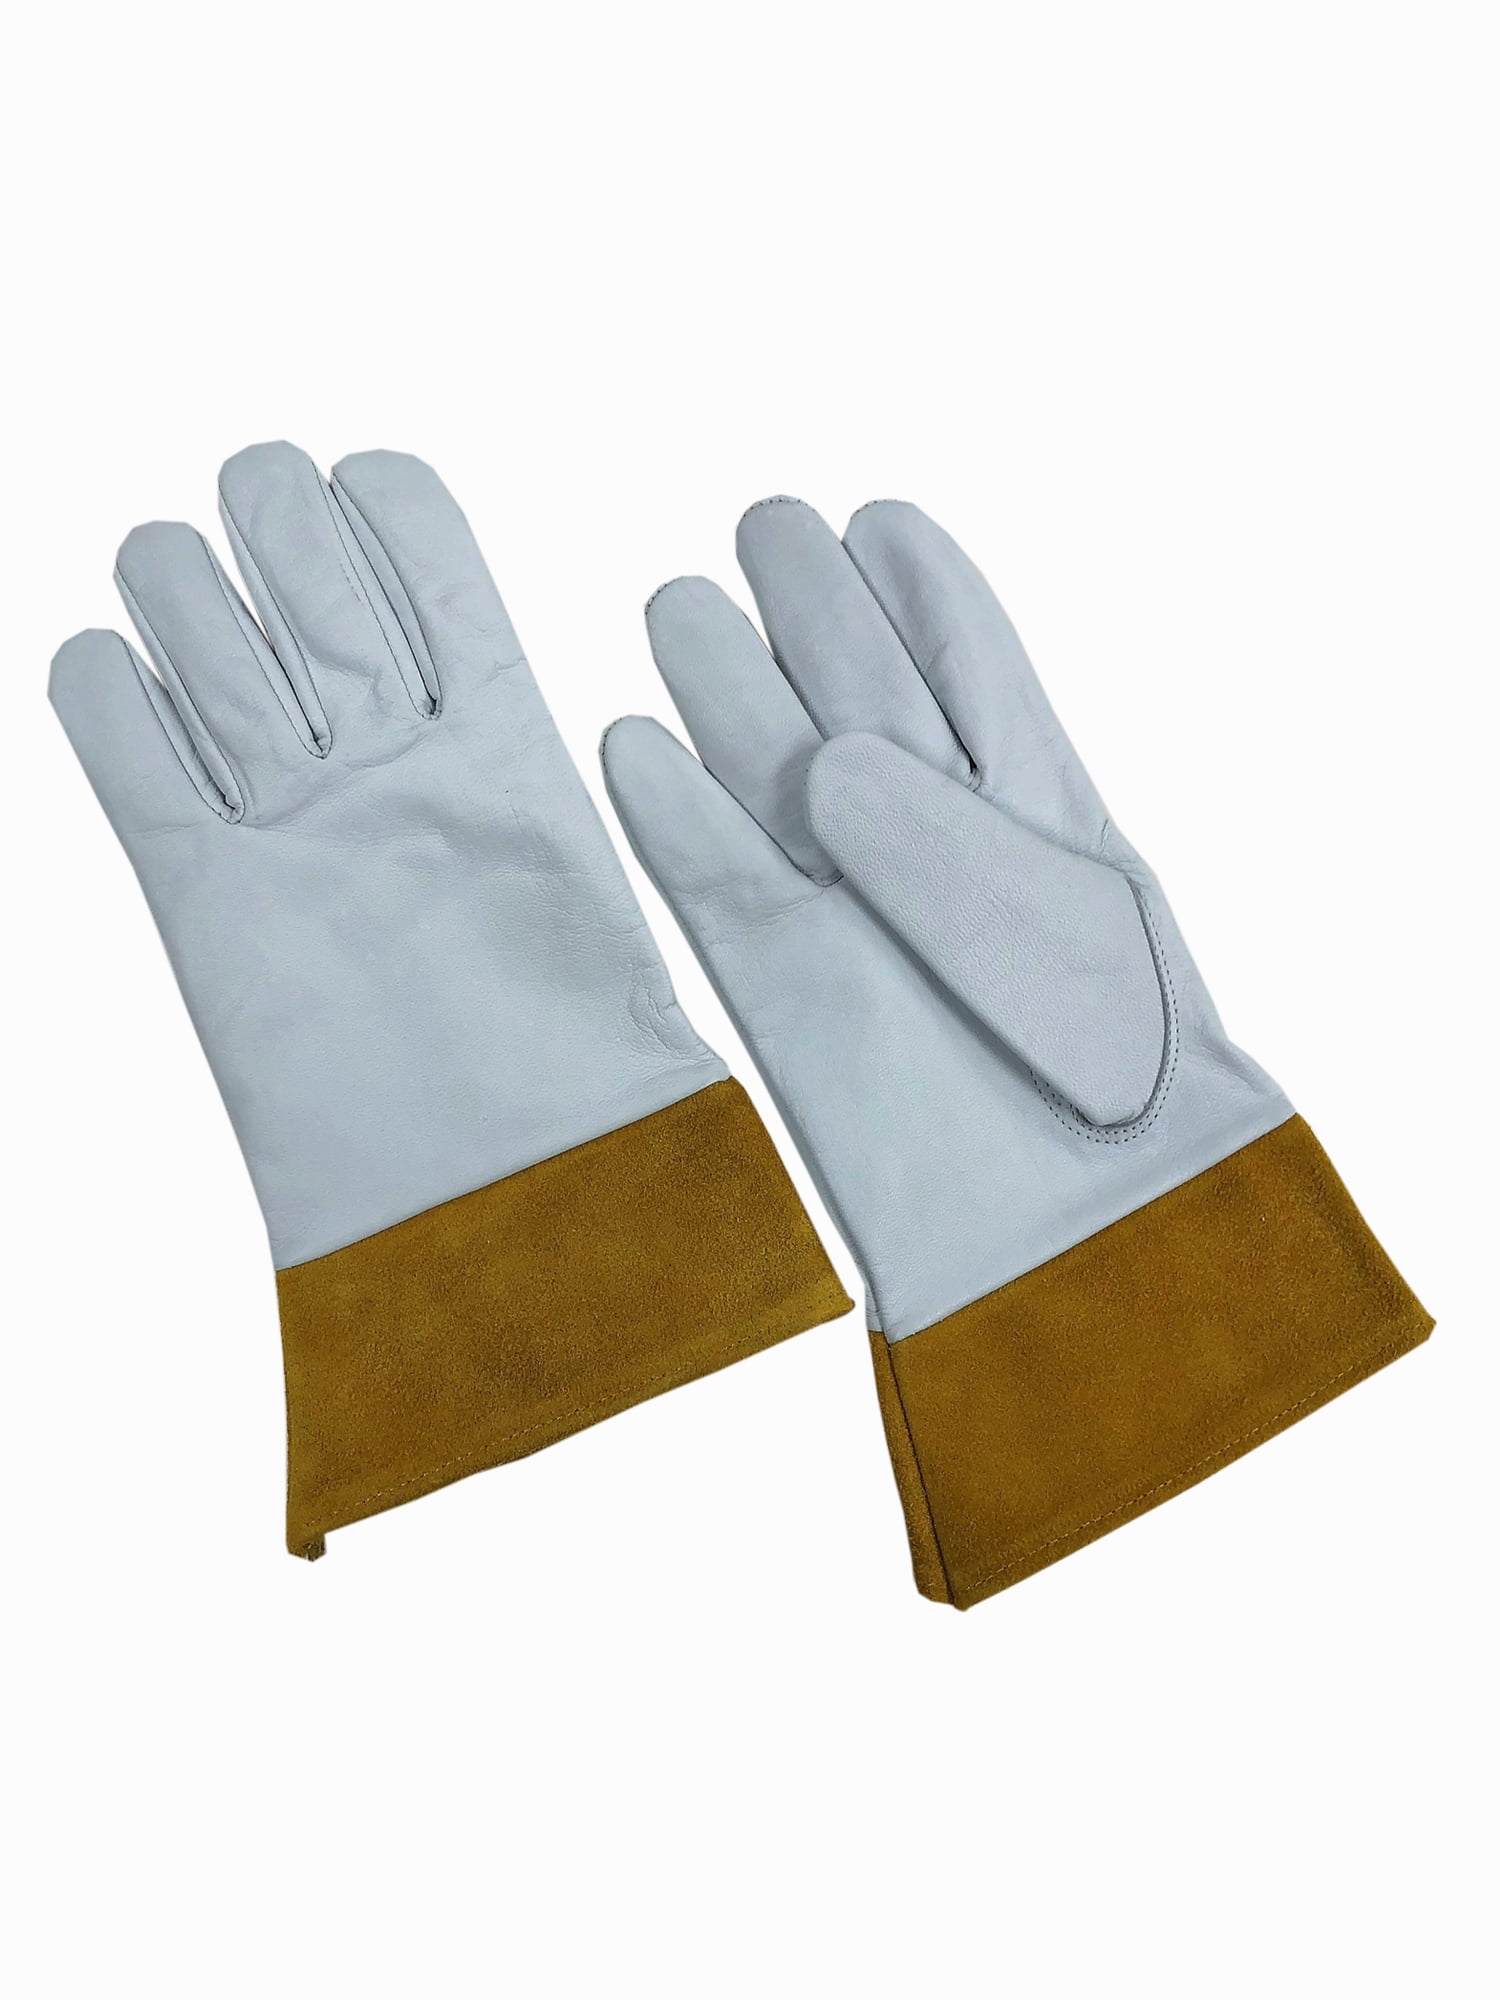 WZQH Leather Work Gloves for Men or Women. Small Glove for Gardening,  Tig/Mig Welding, Construction, Chainsaw, Farm, Ranch, etc. Cowhide, Cotton